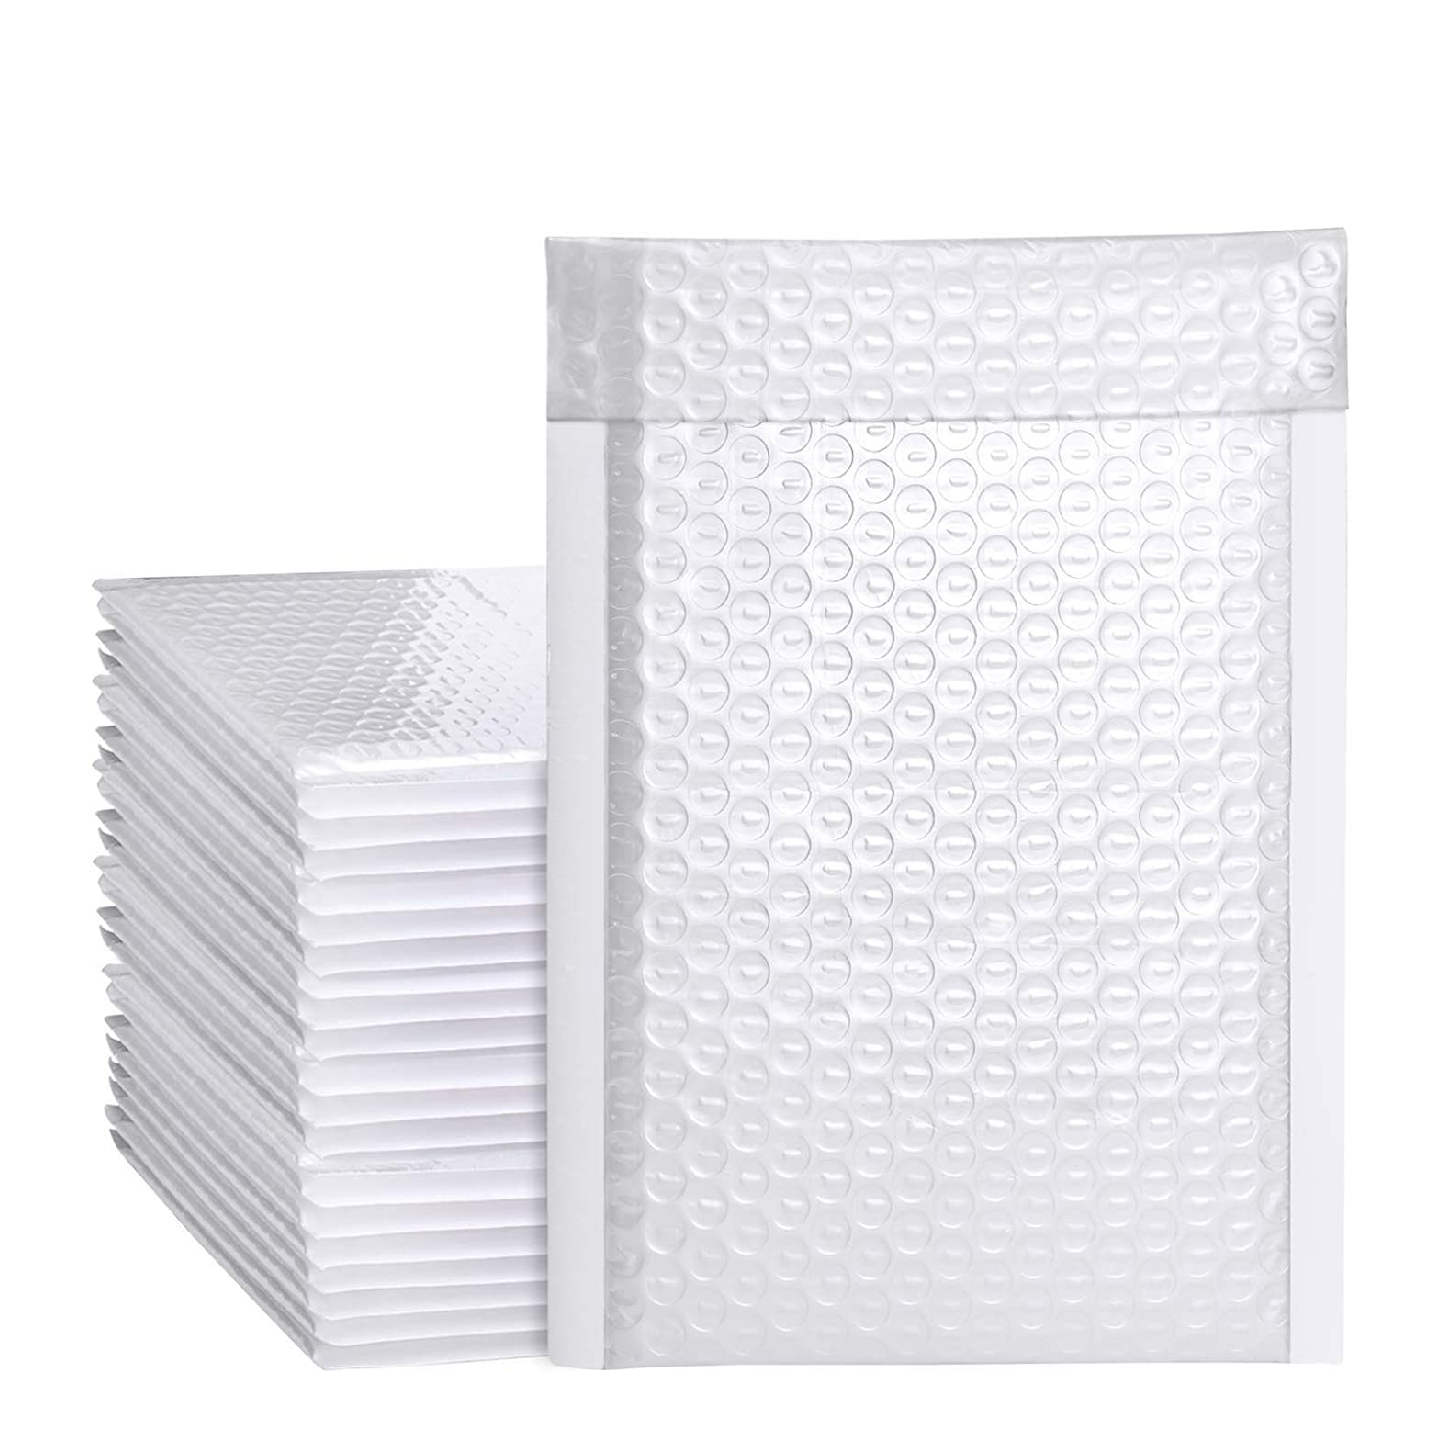 4×8 Bubble Mailers (White)